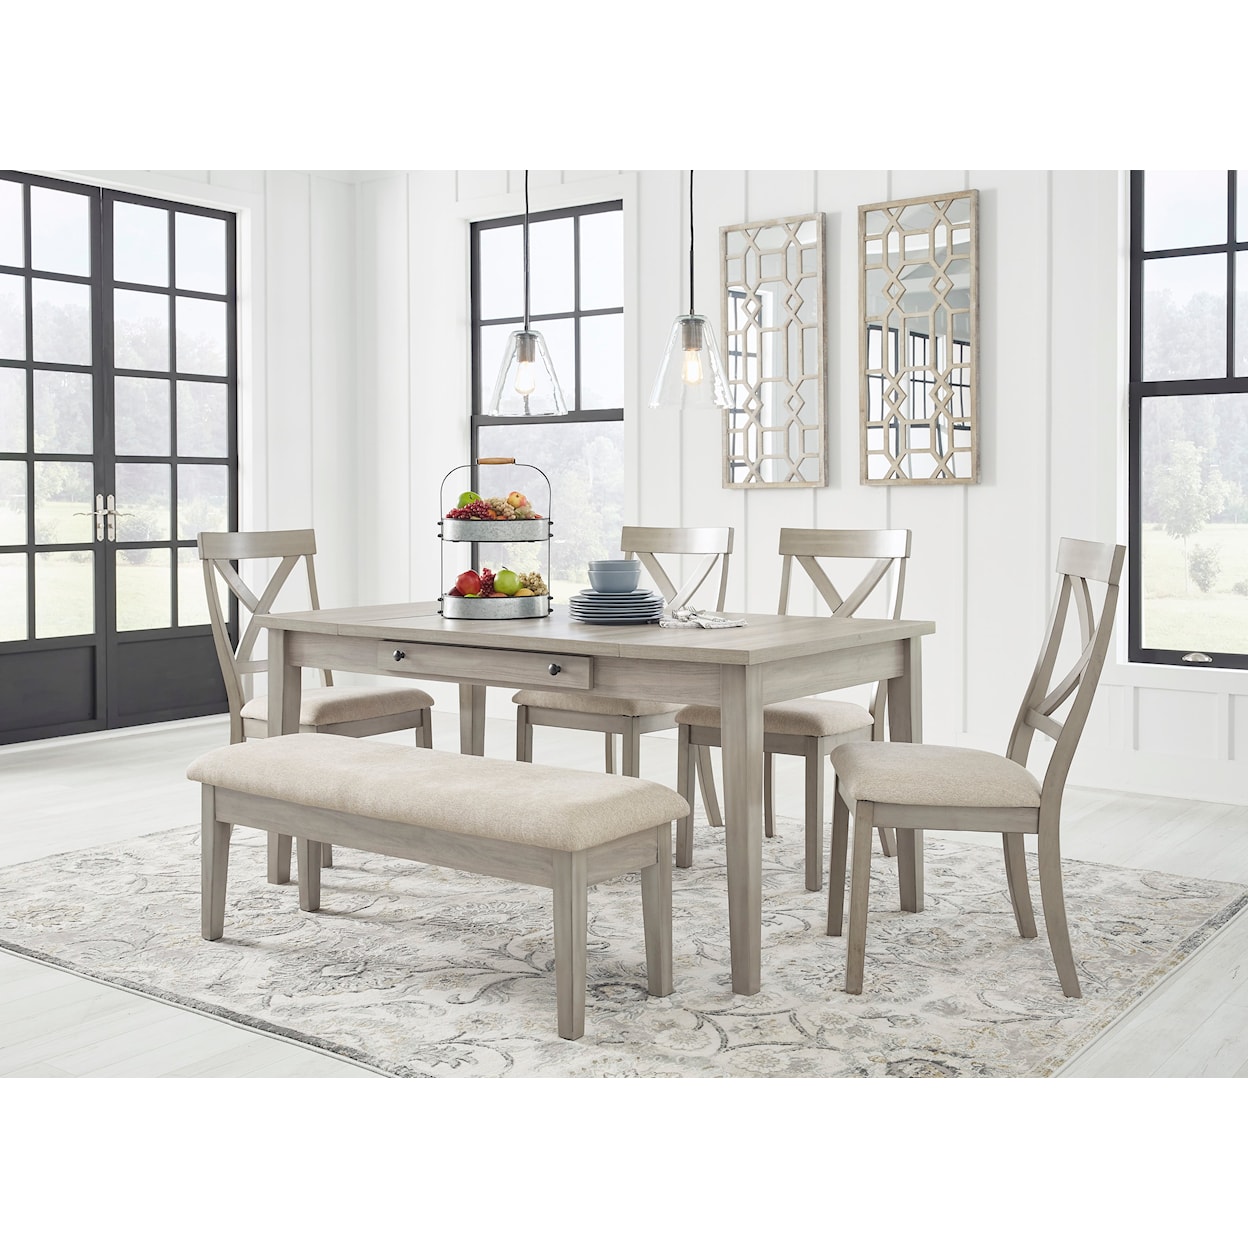 Benchcraft Parellen 6-Piece Table and Chair Set with Bench